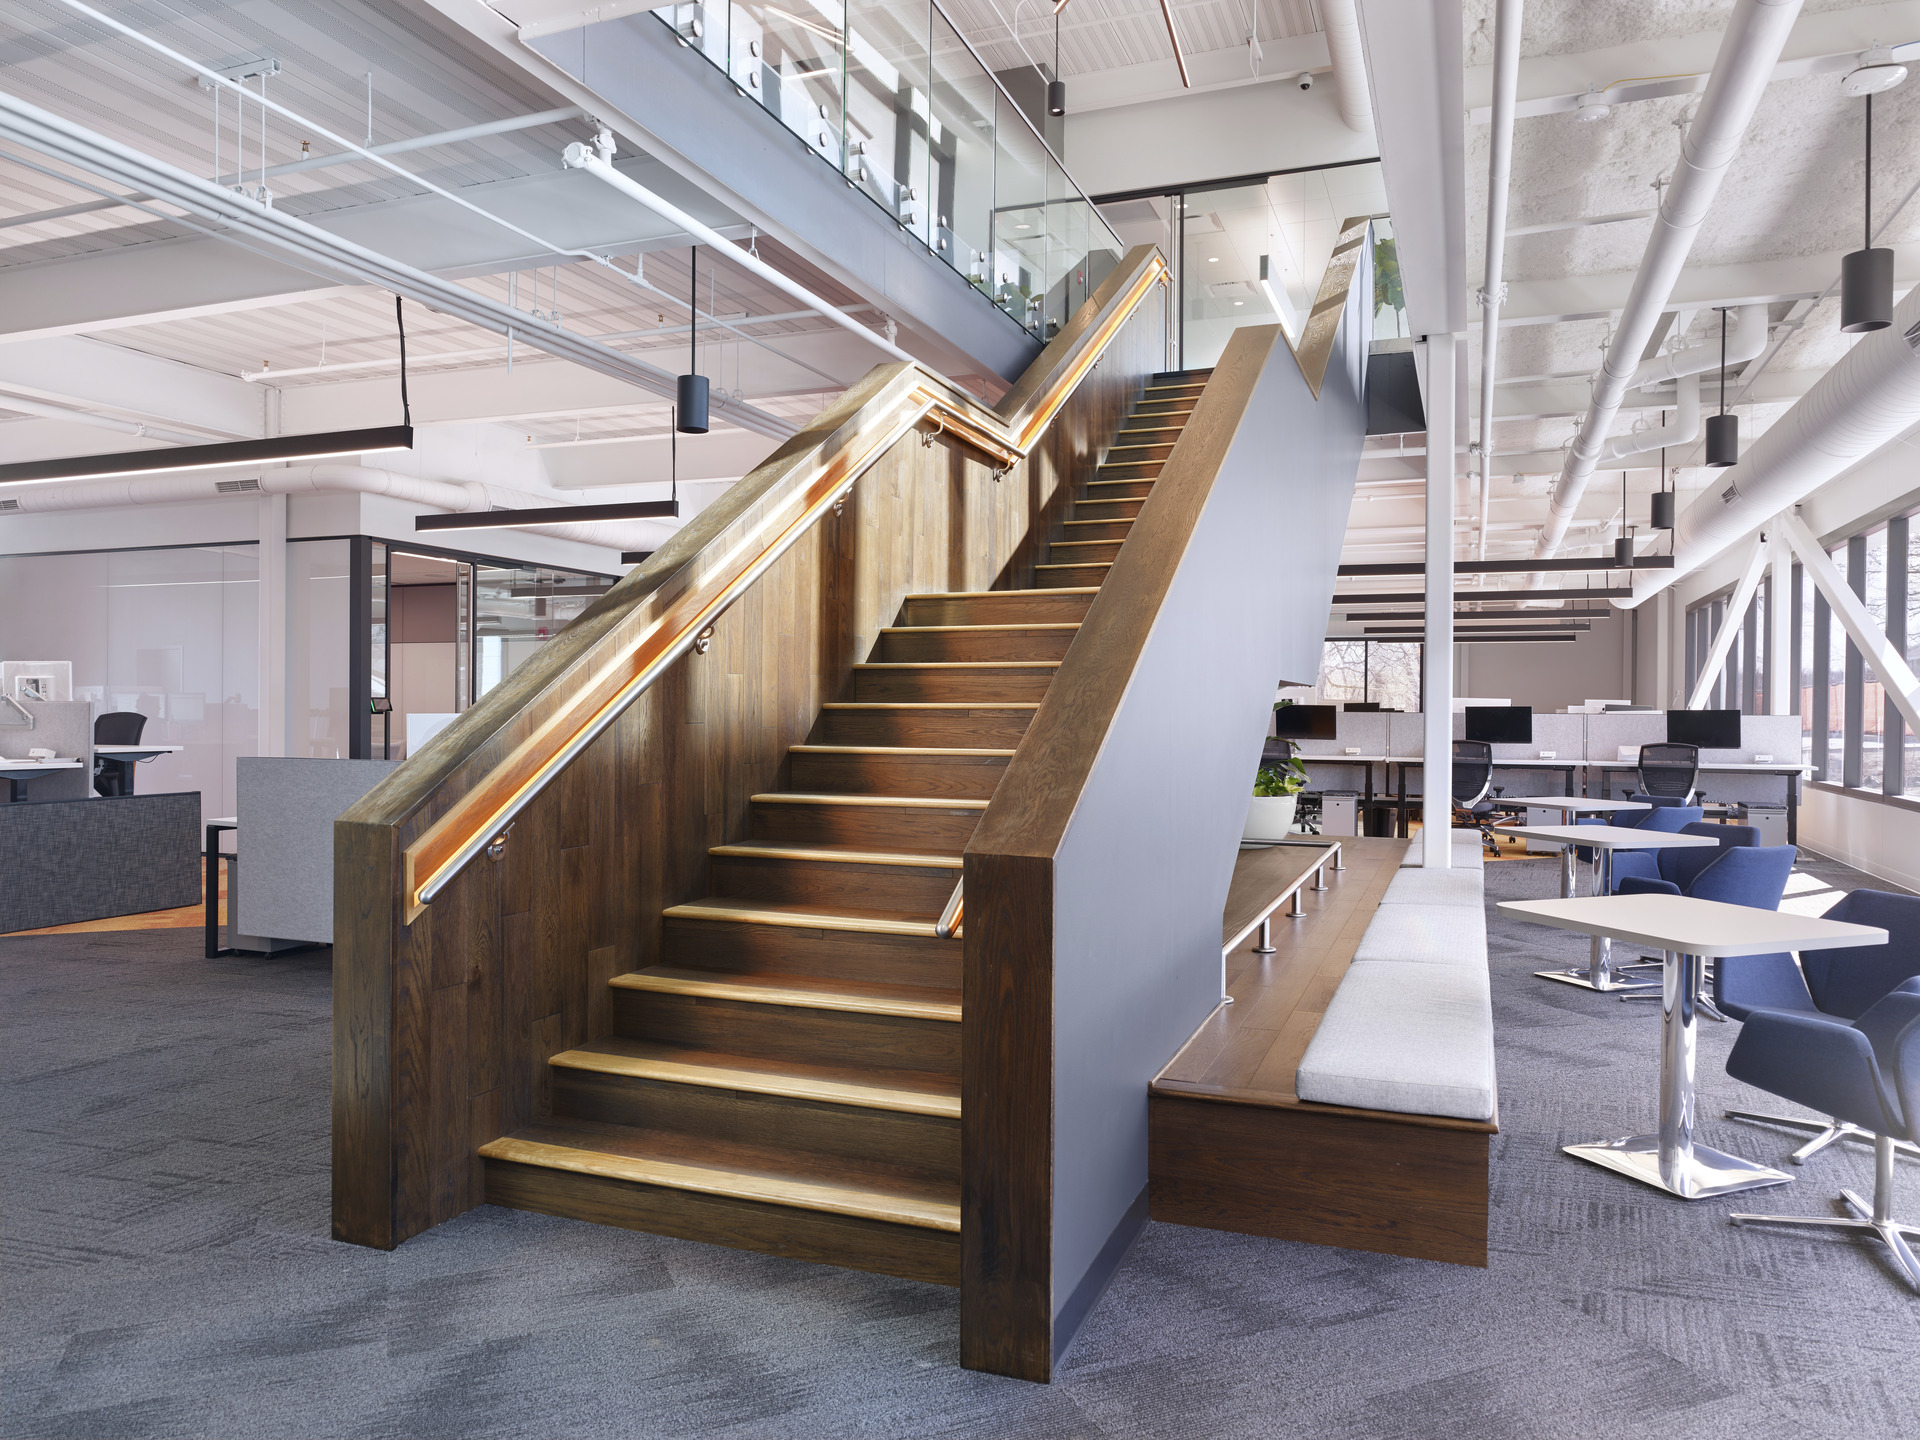 View of staircase with custom lit handrail and flexible work areas